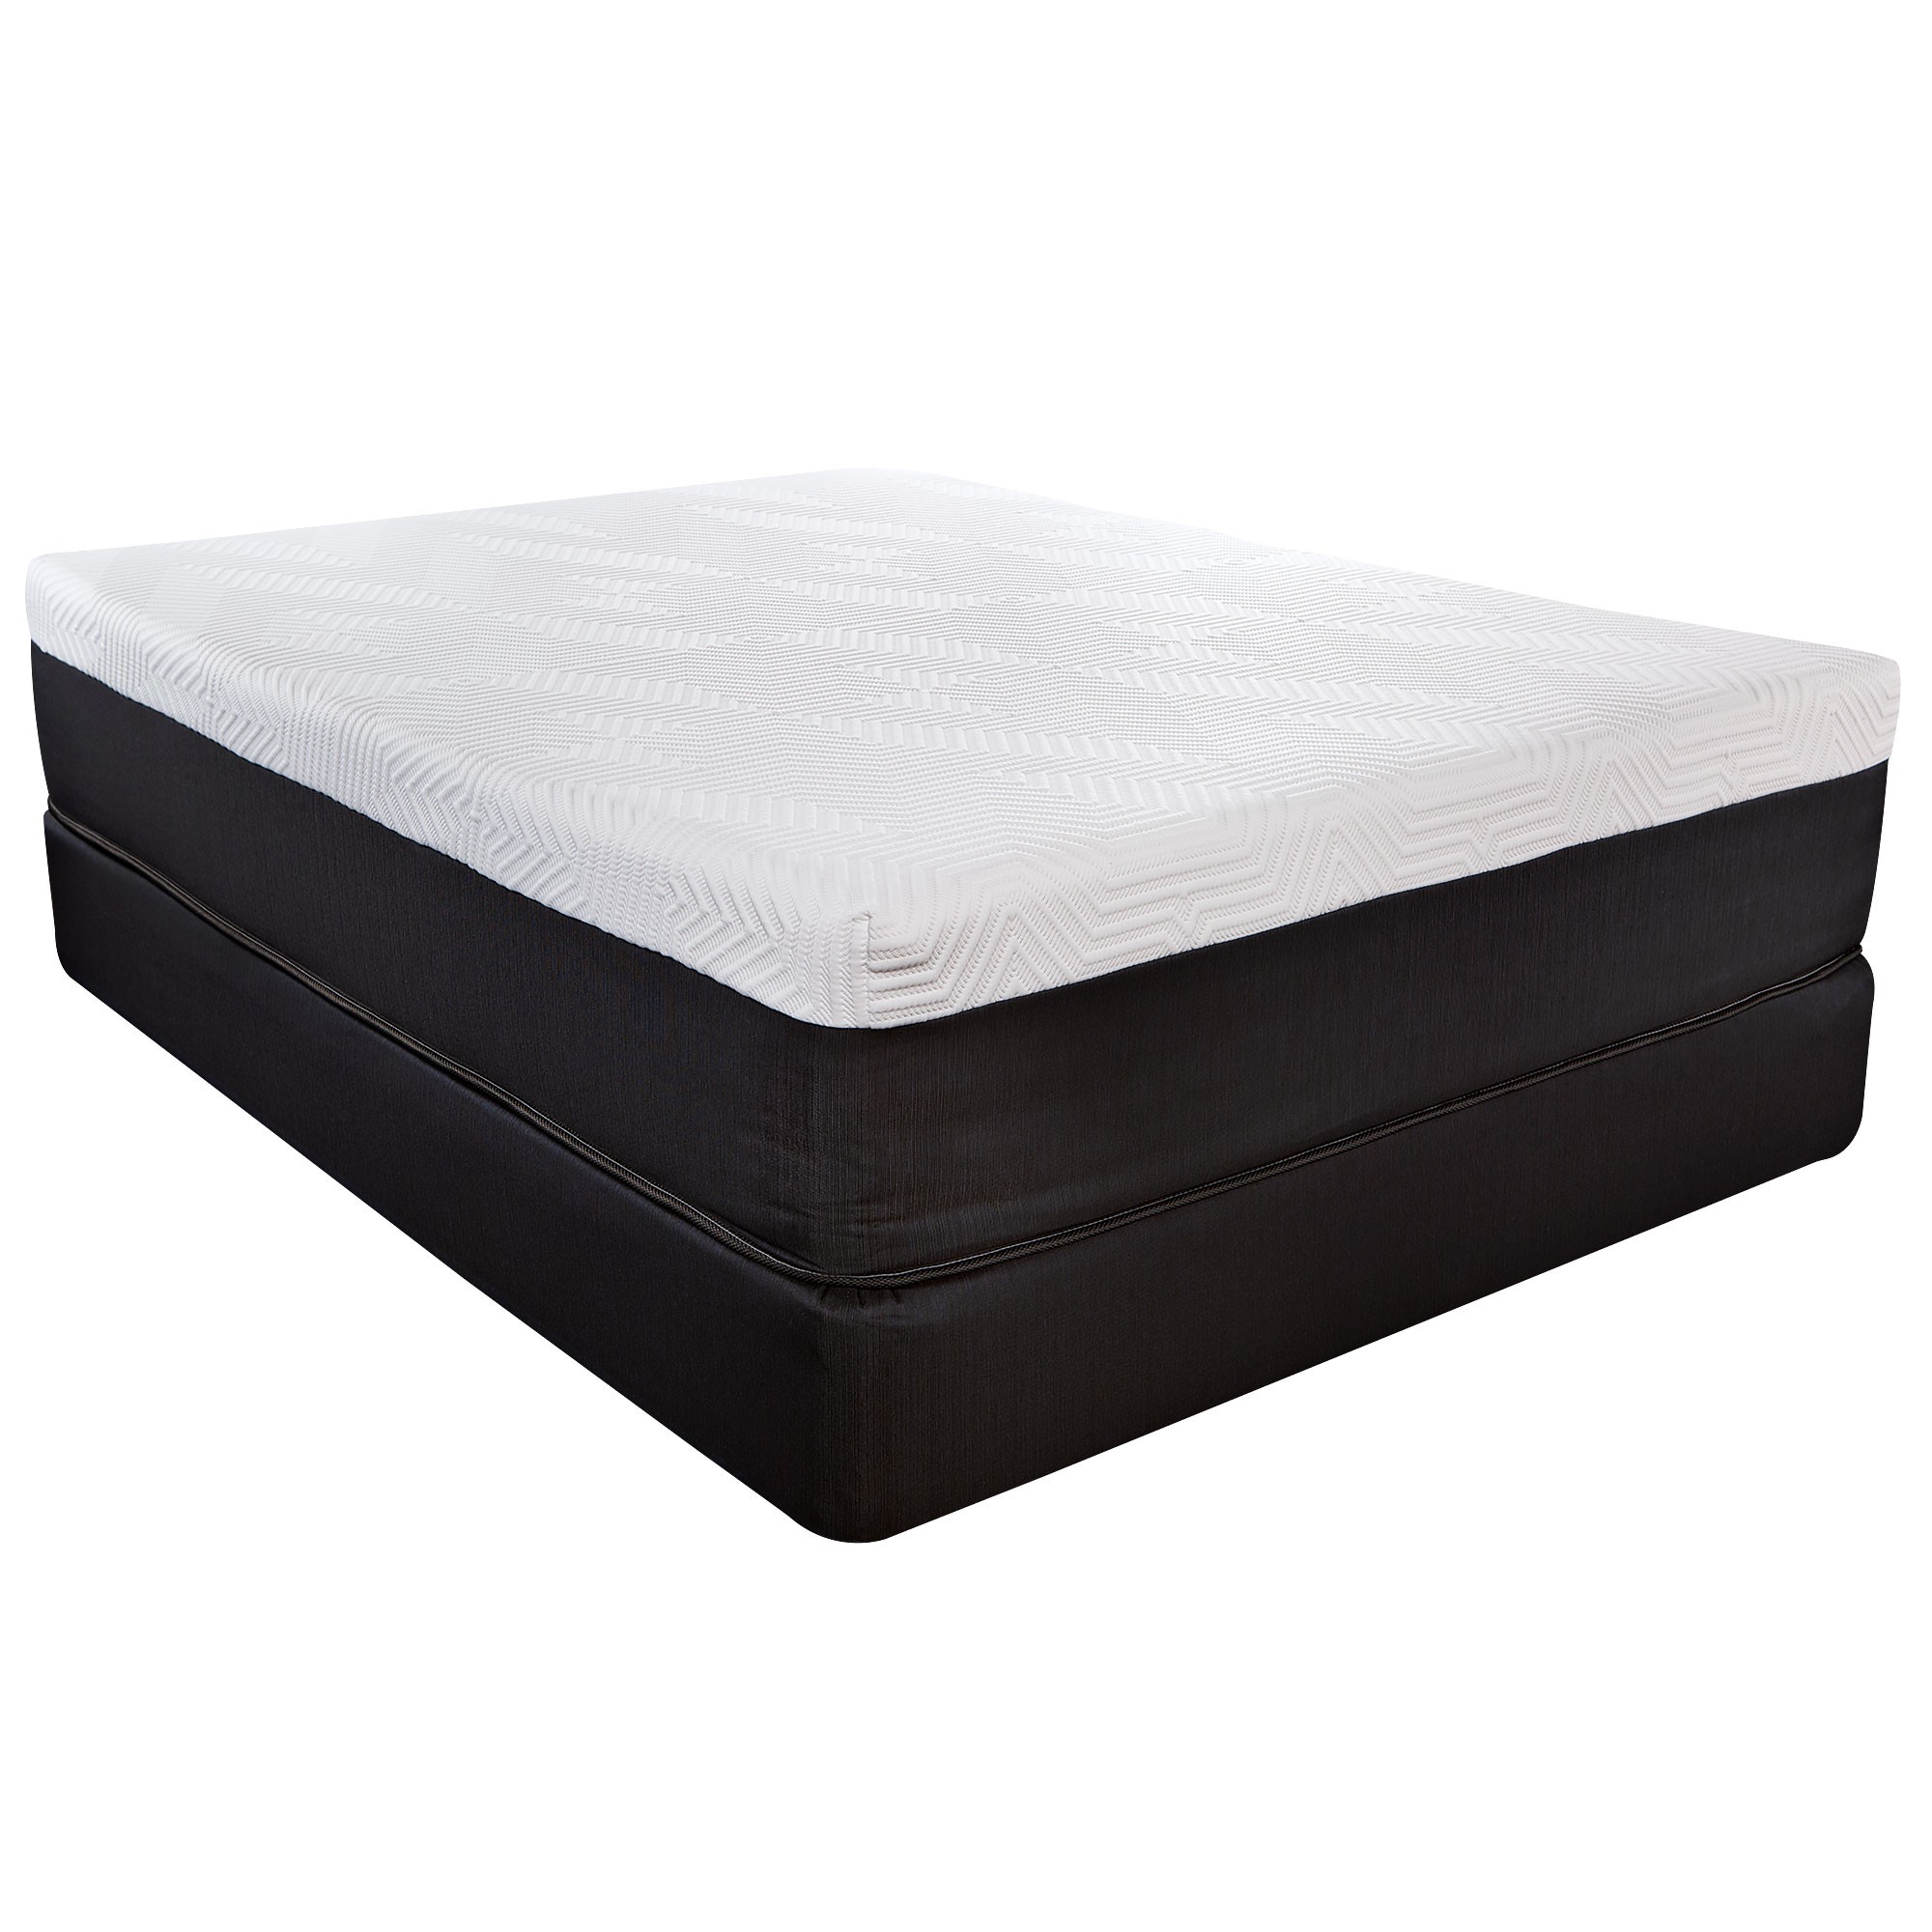 14" Hybrid Lux Memory Foam And Wrapped Coil Mattress Twin Xl-391643-1